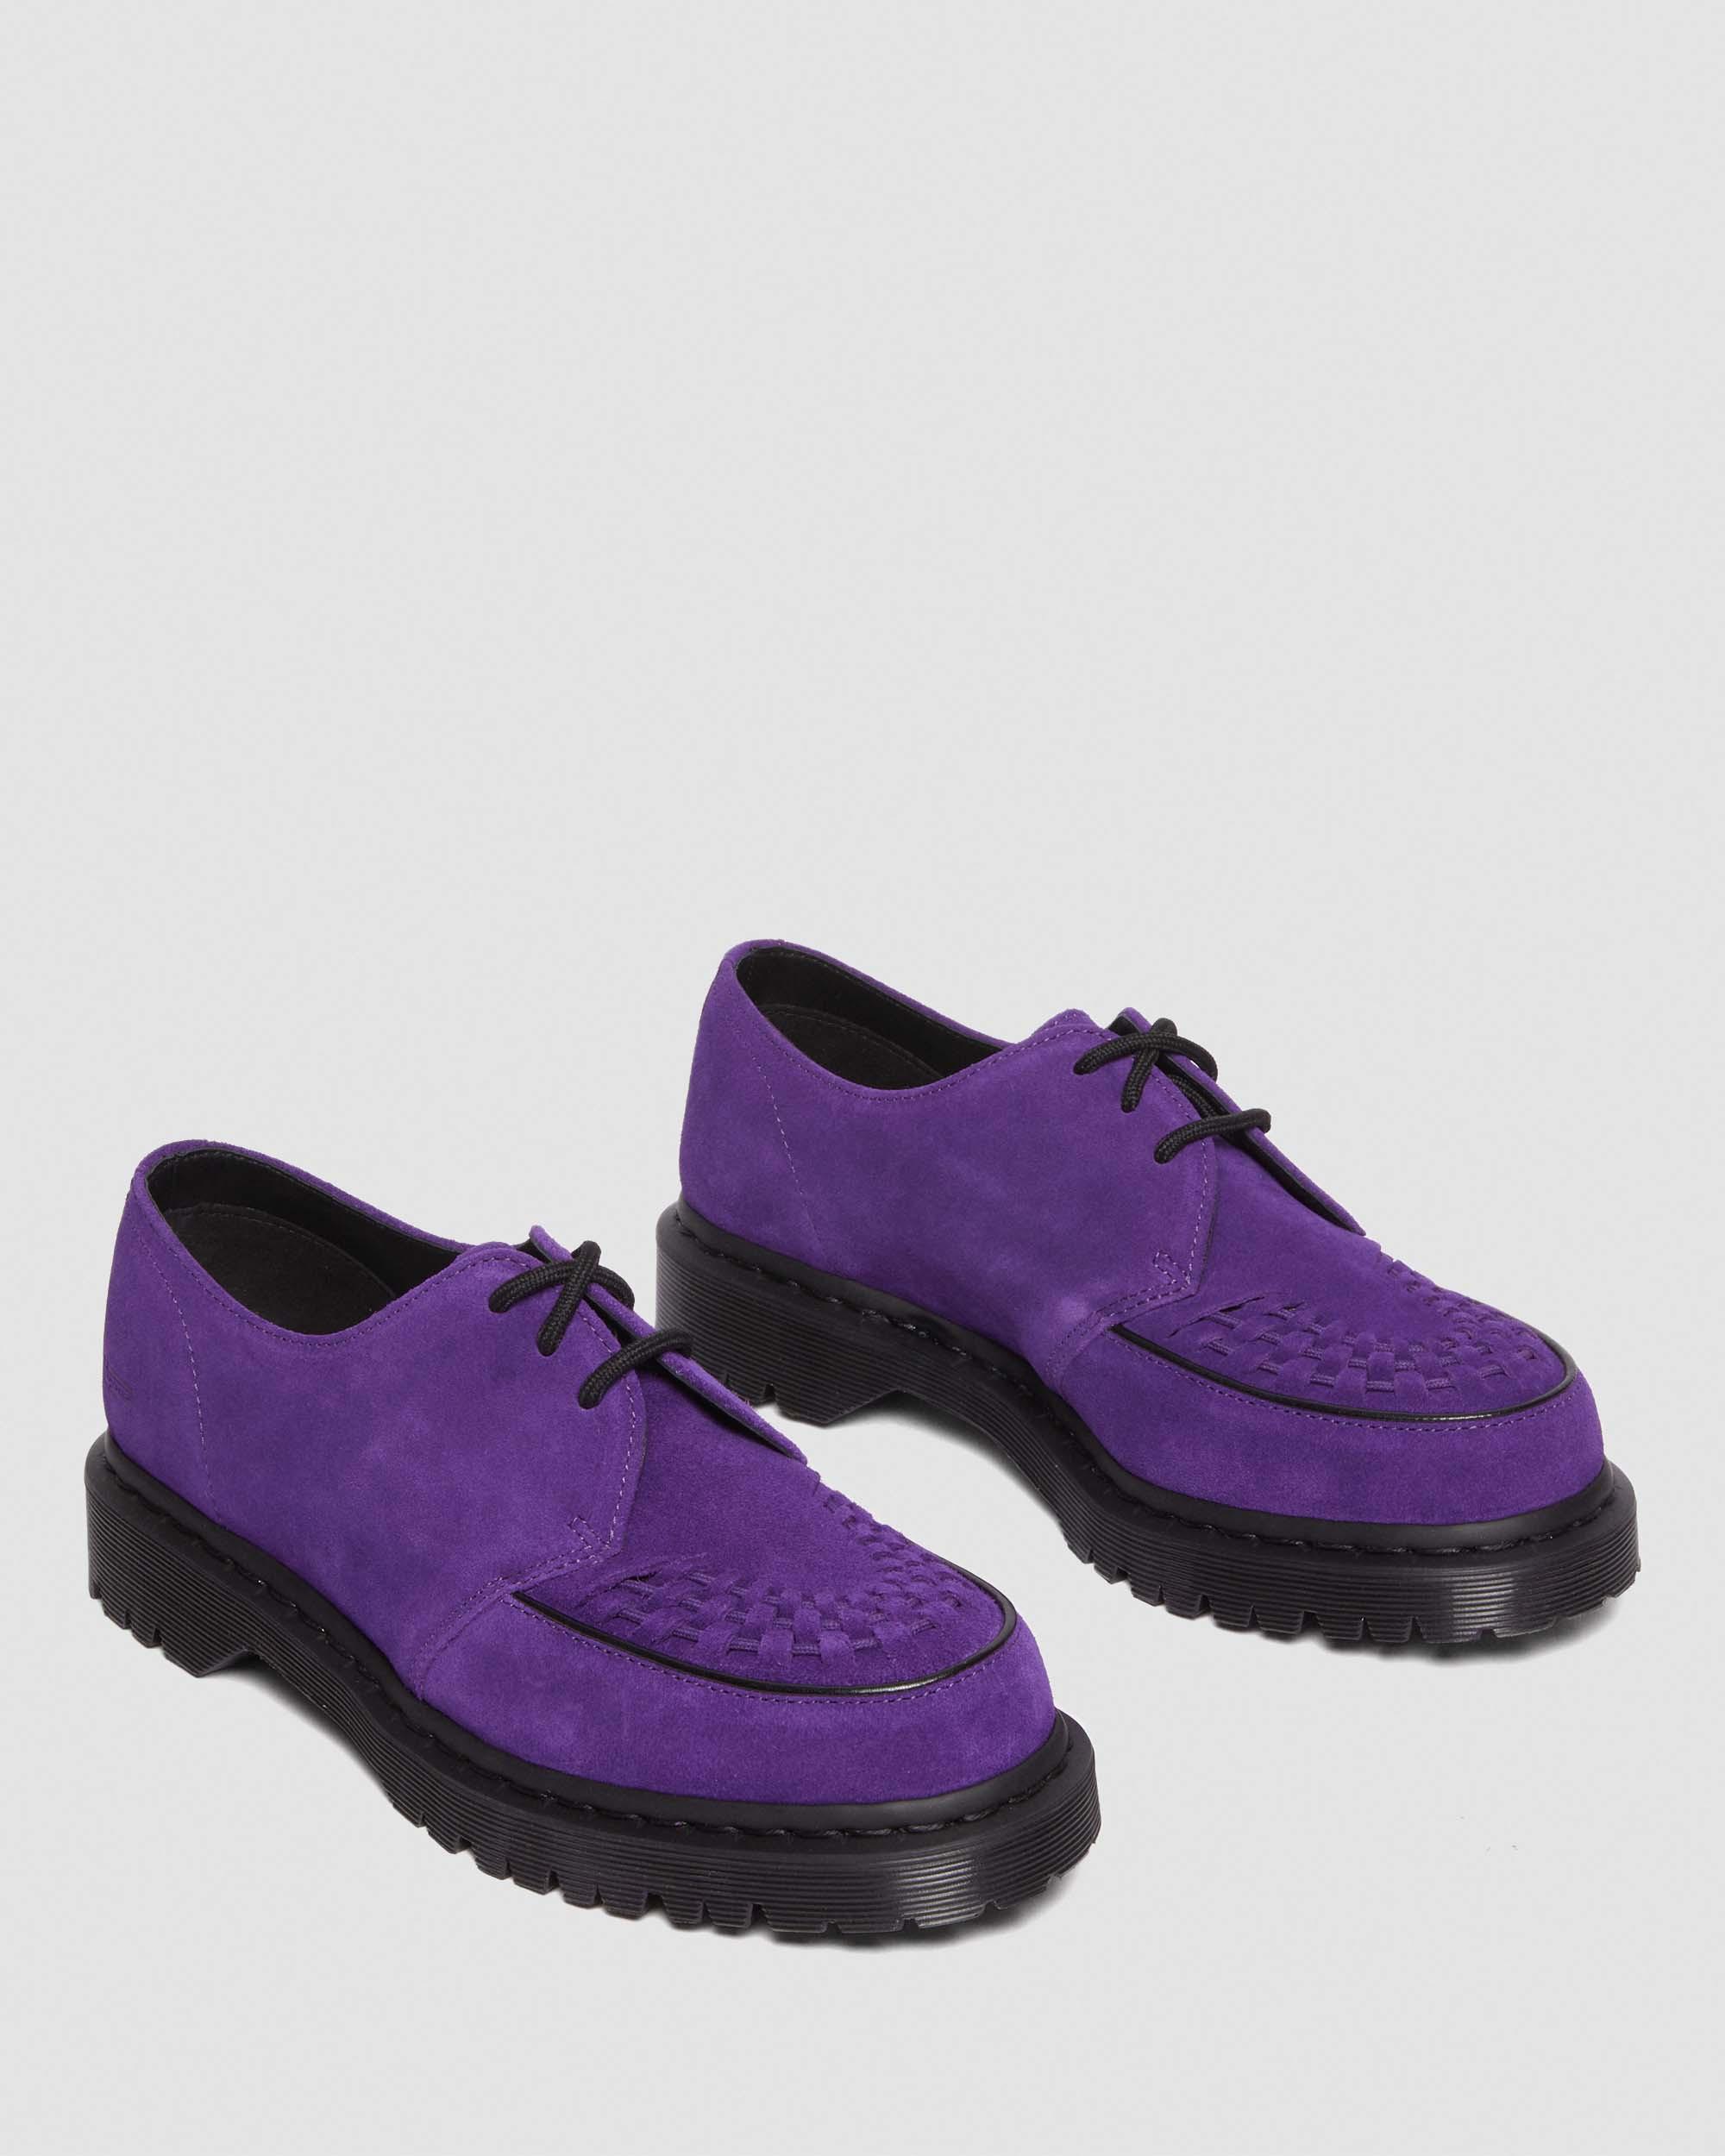 Ramsey Supreme Suede Creeper Shoes in Purple